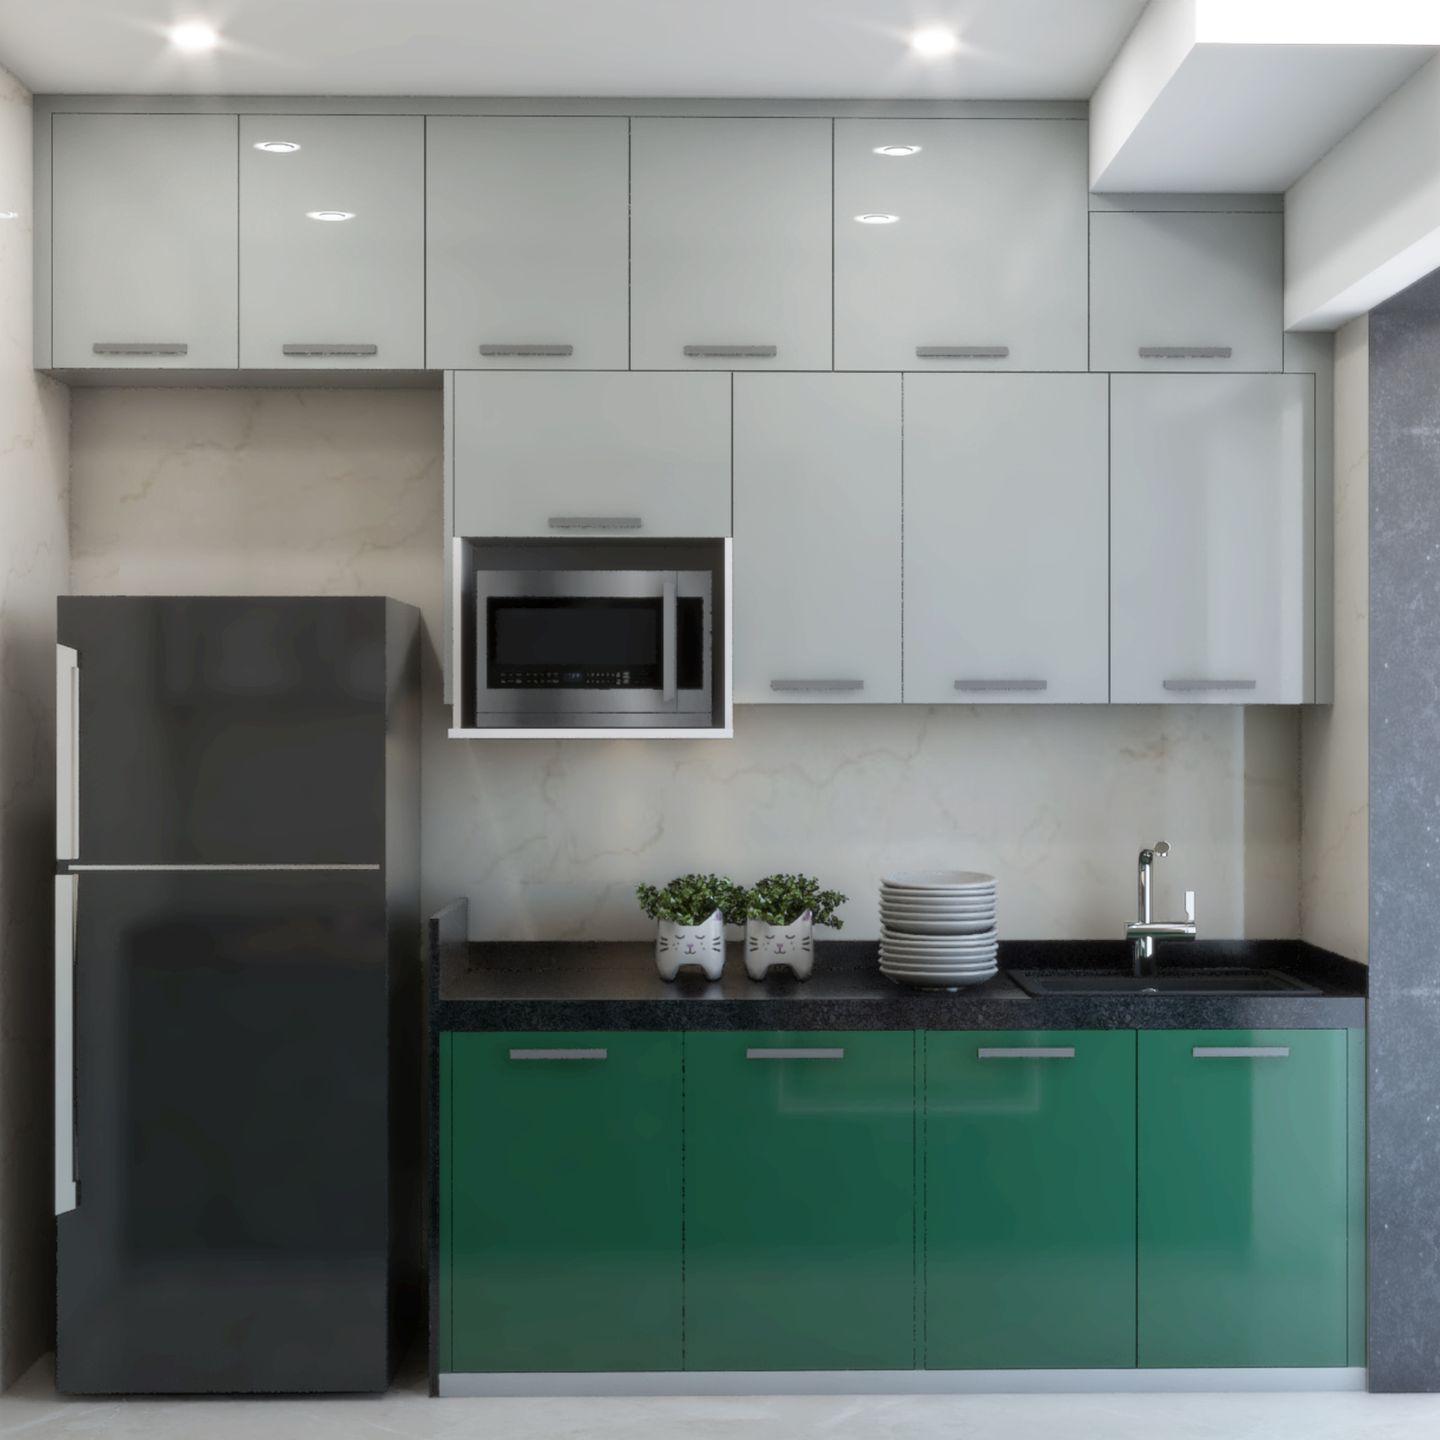 Parallel Kitchen Design In Green And Grey - Livspace